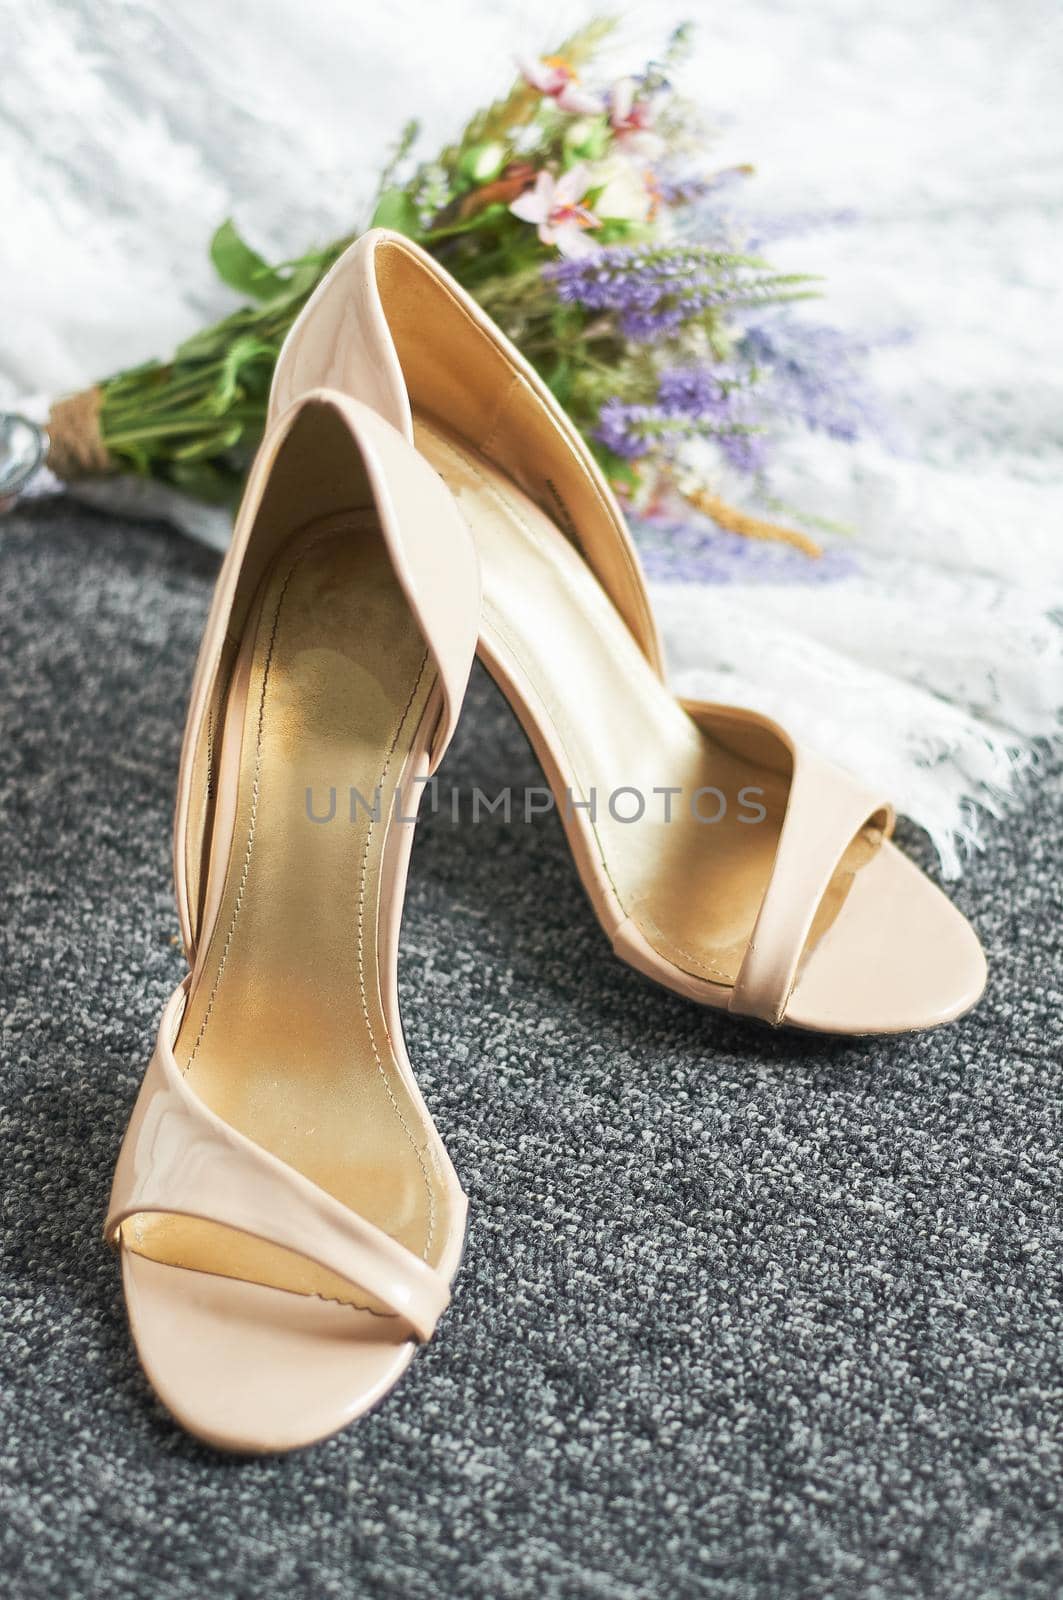 wedding shoes on the rug next to the bridal bouquet by ozornina